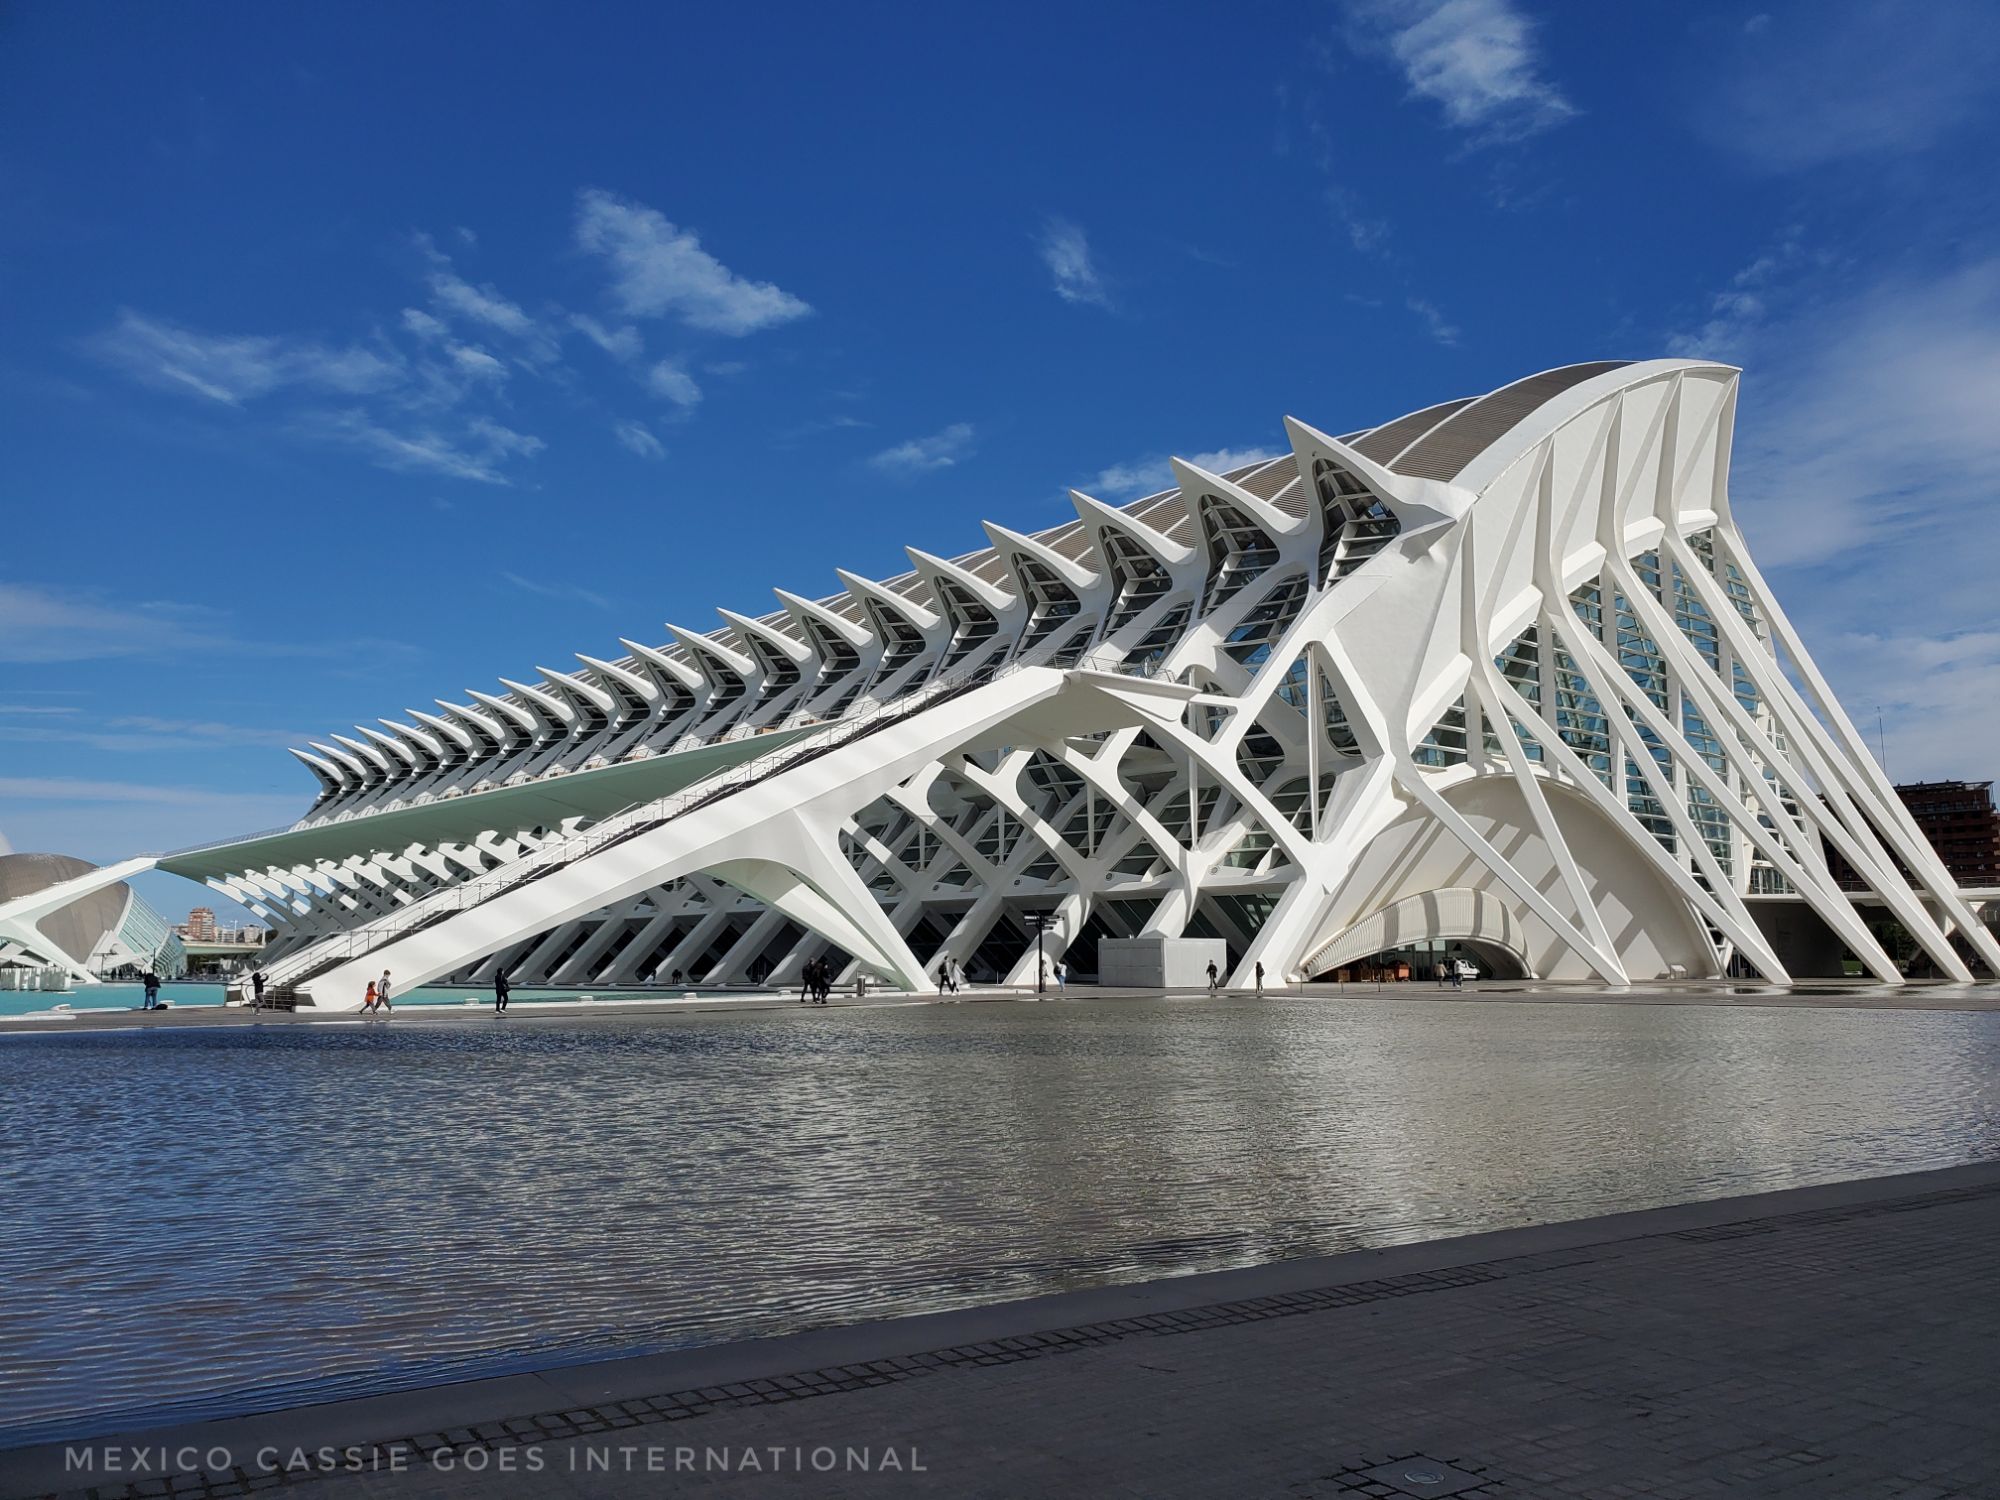 Valencia's science museum (white bones of a building with water in front) blue sky